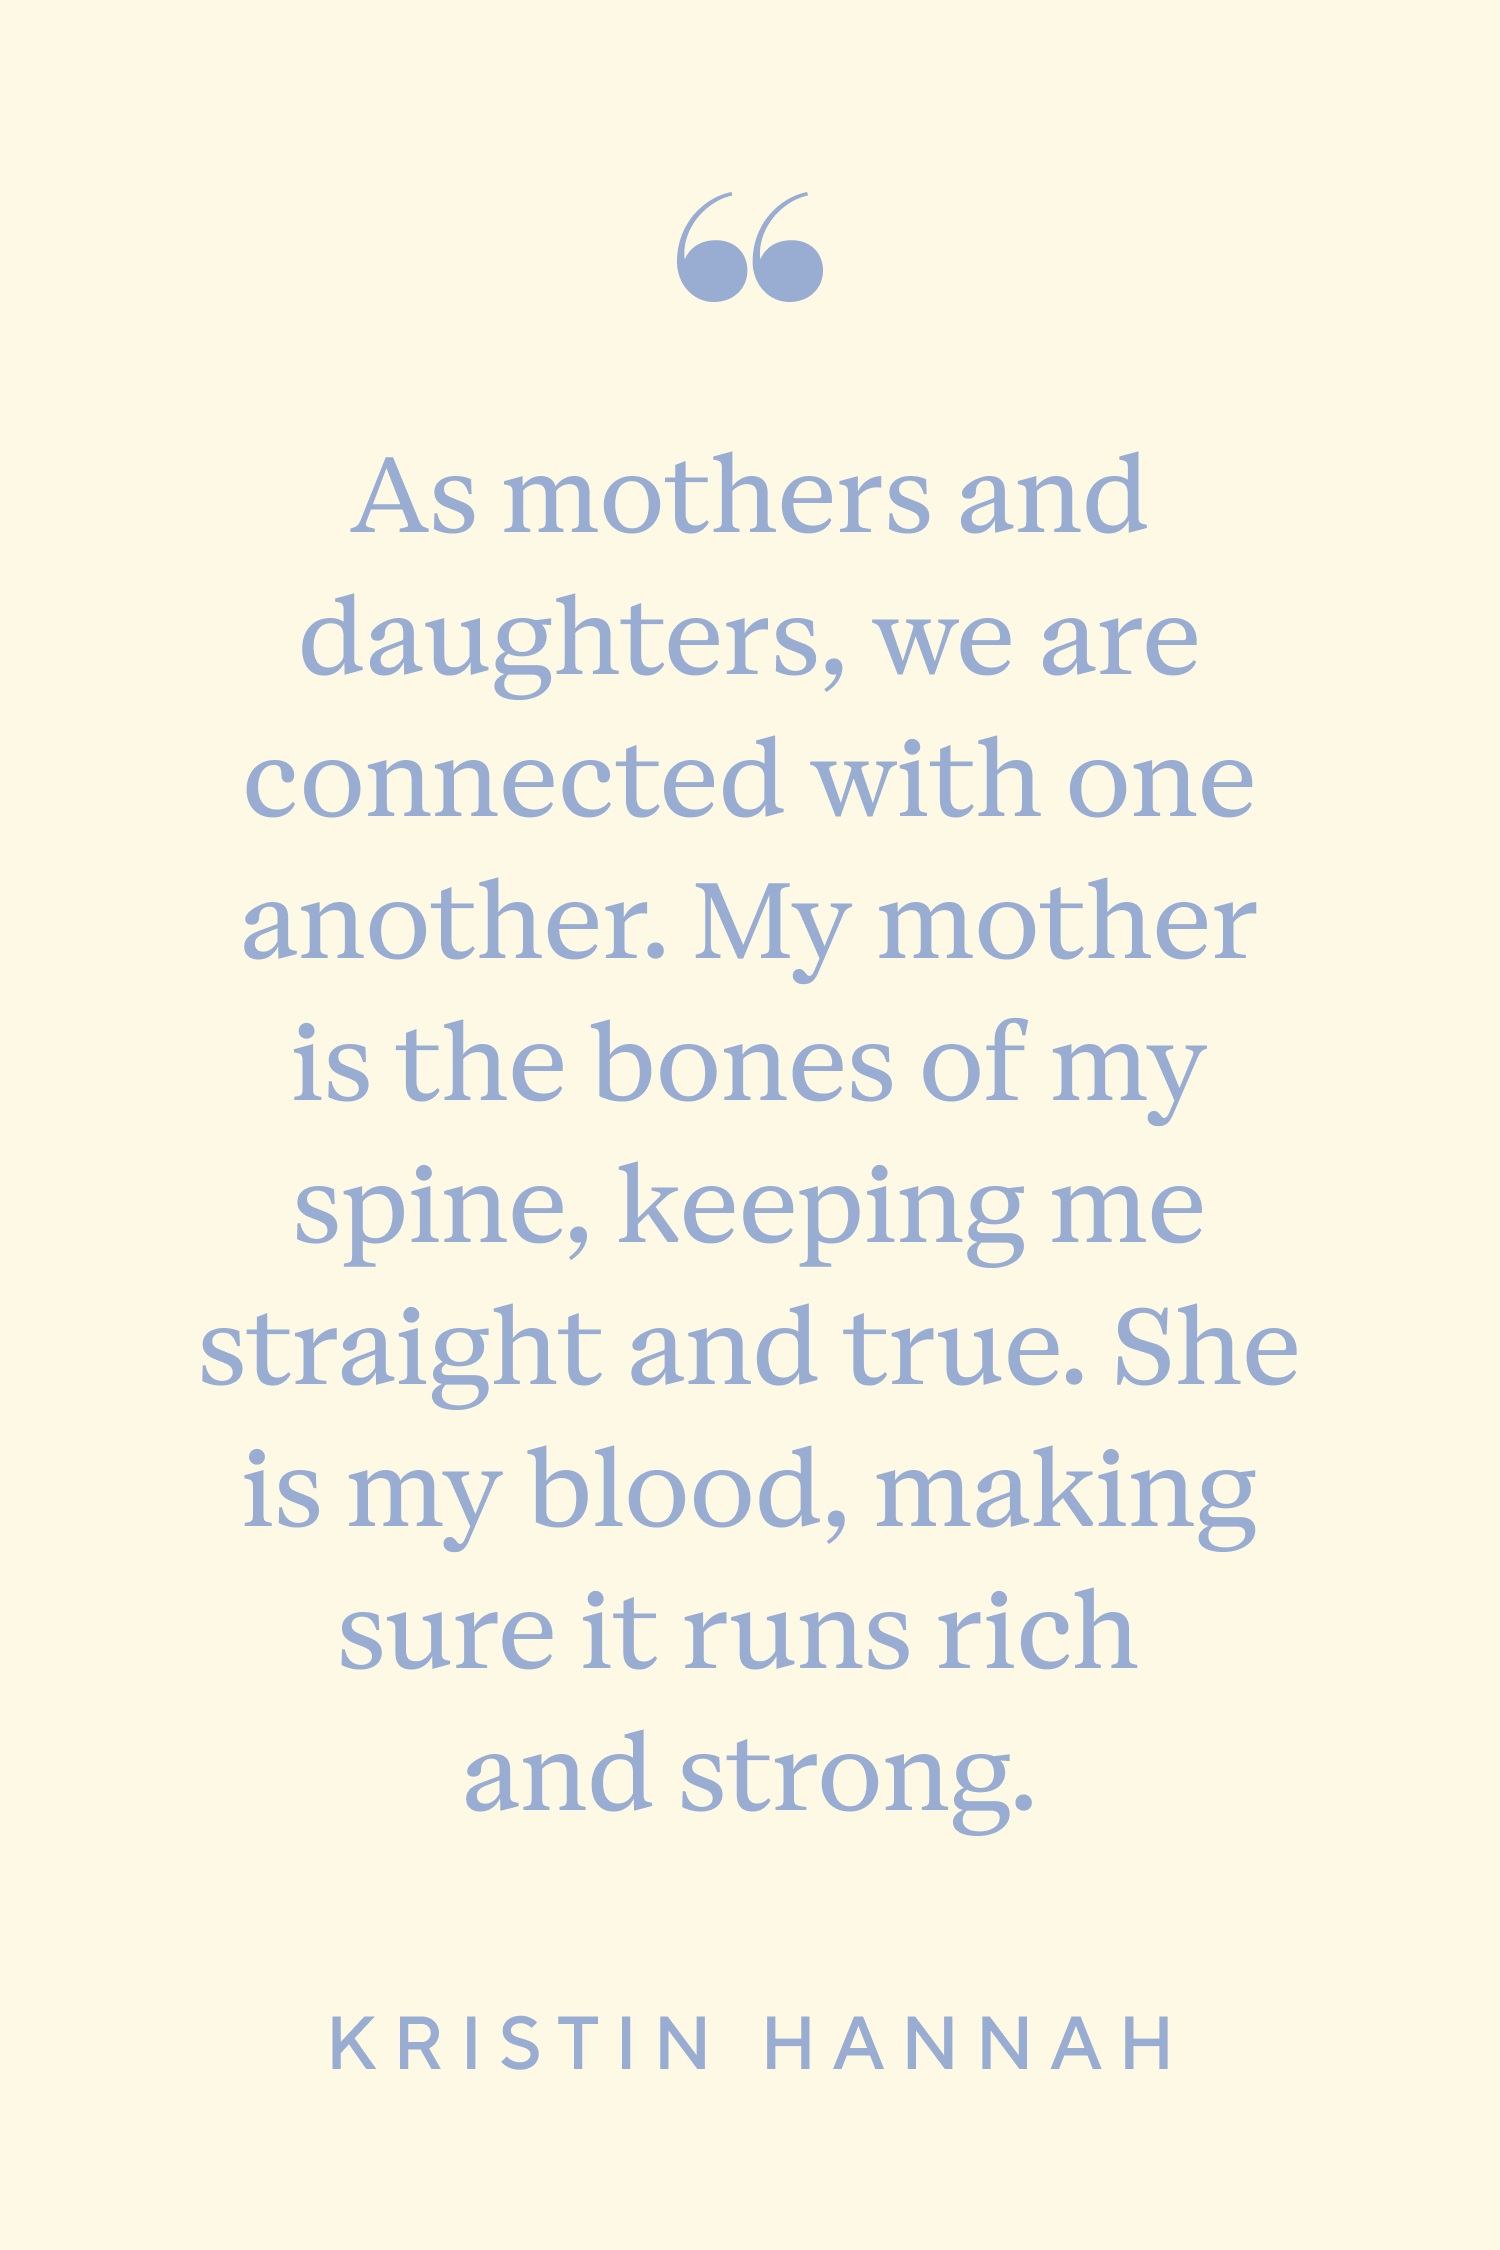 quotes about mothers and daughters bonds